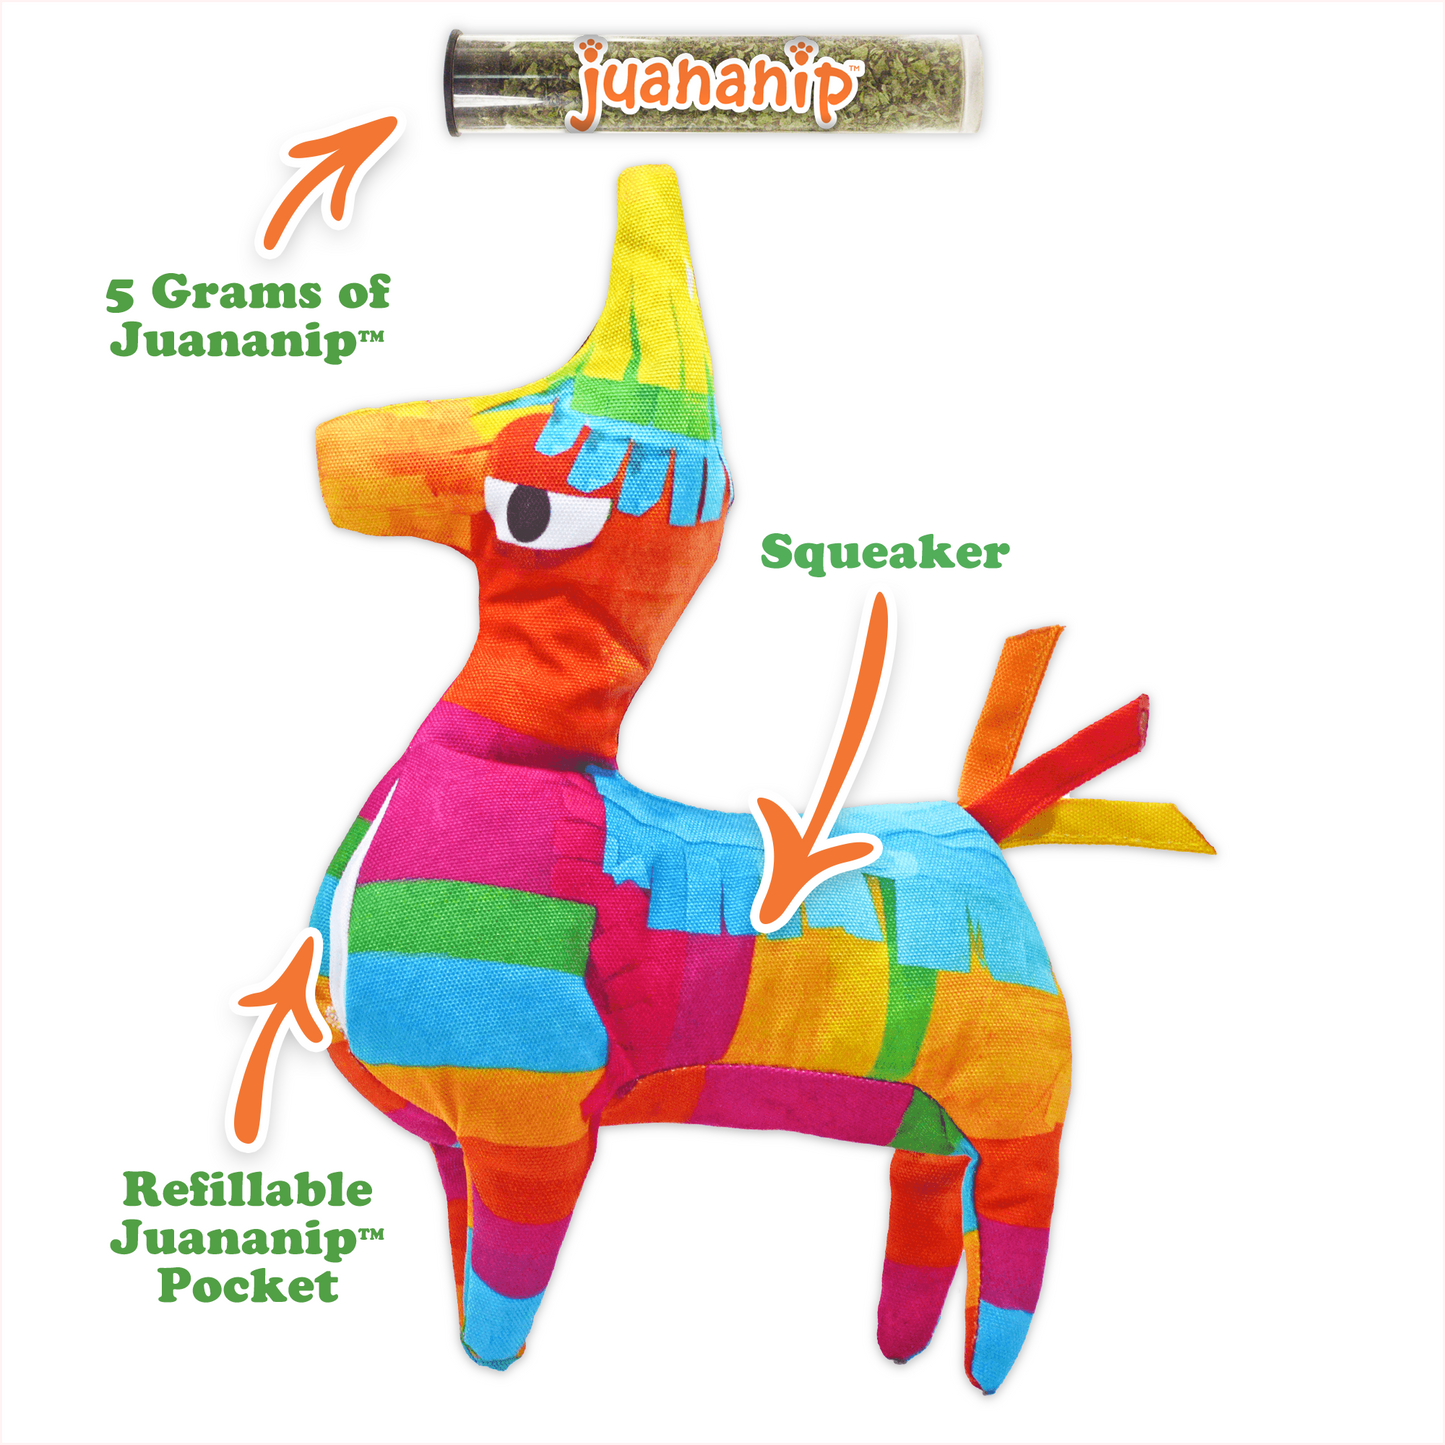 Get the Pawty Started Refillable Llama Piñata Toy